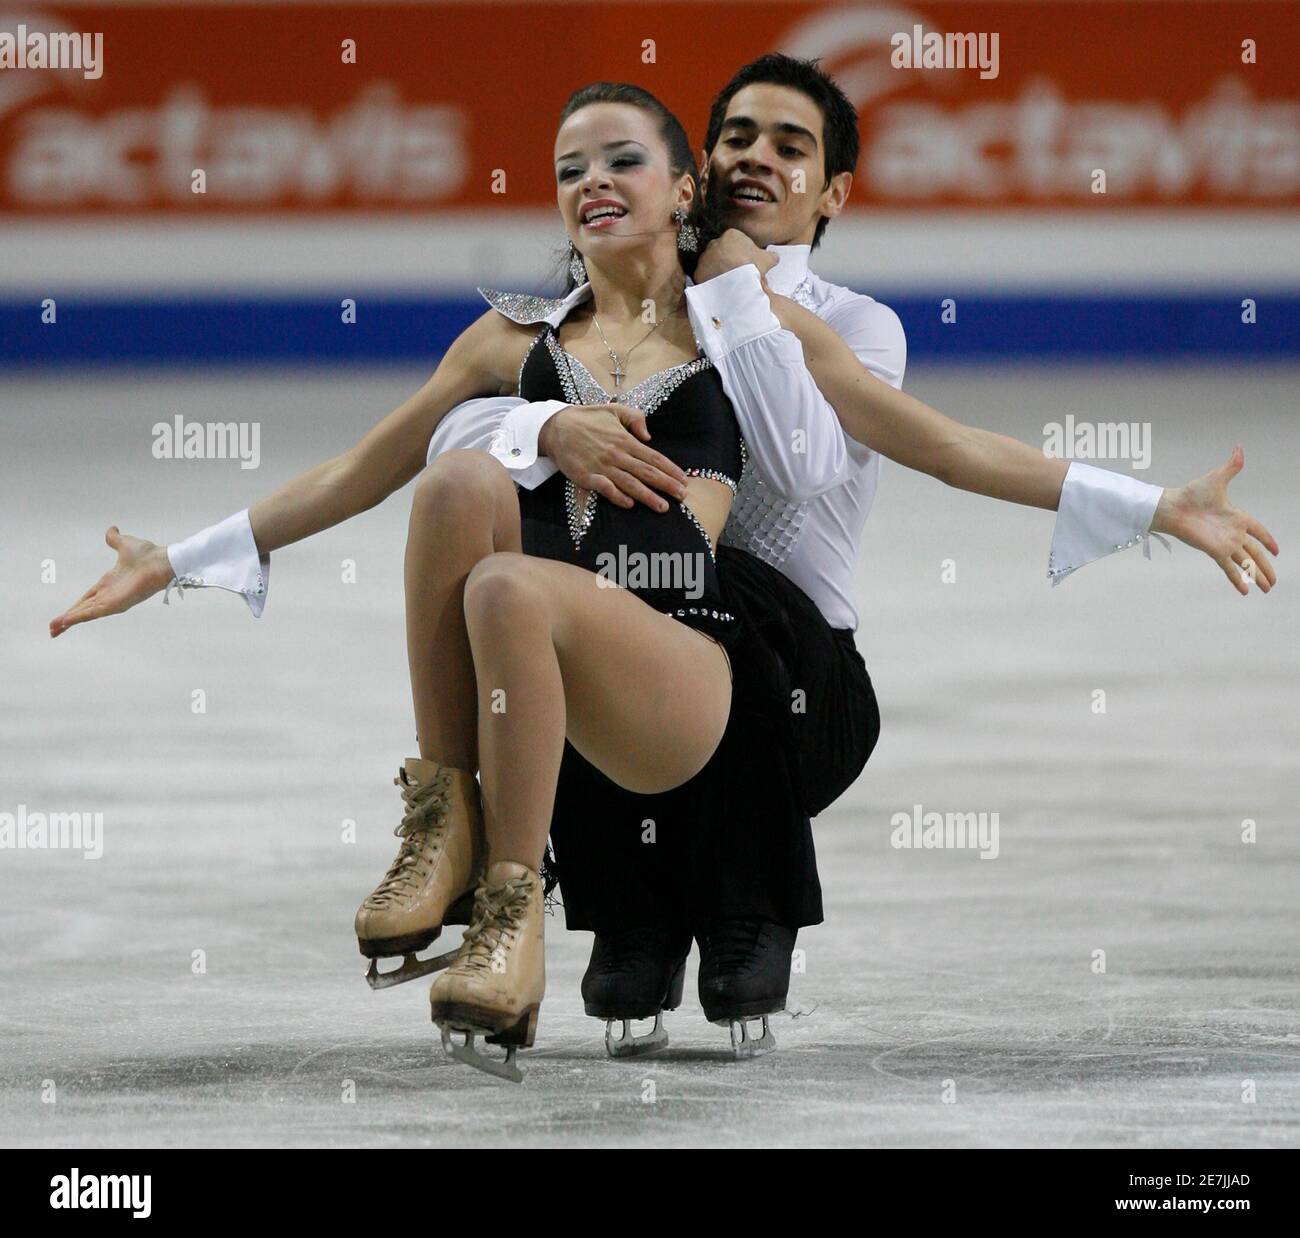 Italy's Anna Cappellini and Luca Lanotte perform during the pairs Free  Dance Programme of the European Figure Skating Championships at the Torwar  ice rink in Warsaw January 26, 2007. REUTERS/Tom Szlukovenyi (POLAND